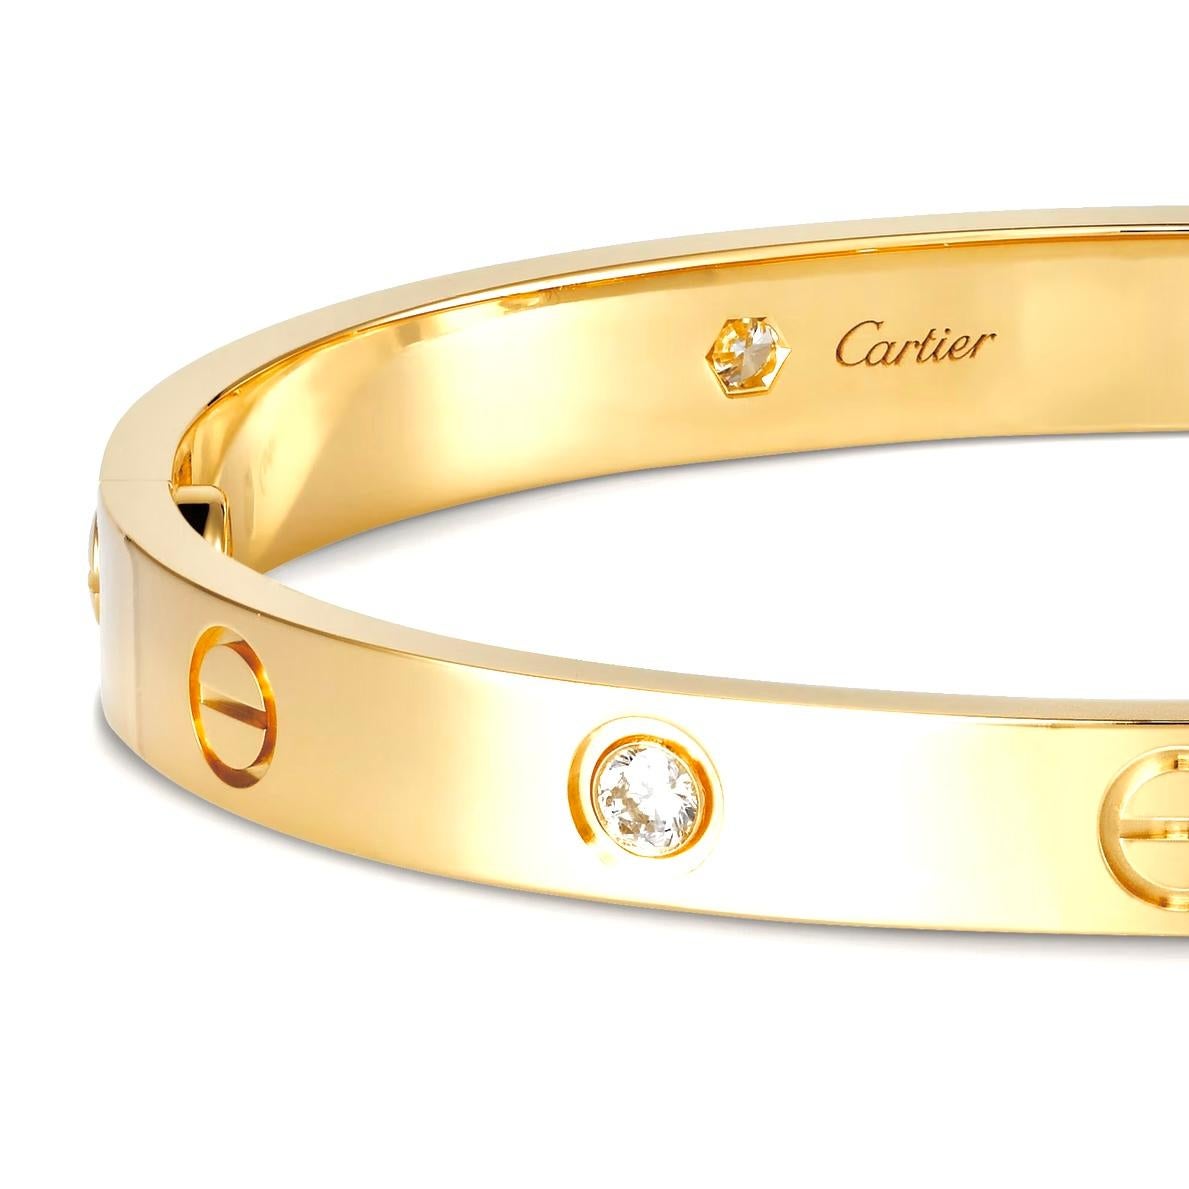 Designer: Cartier
Collection:  Love
Style: Bangle
Metal: Yellow Gold 
Metal Purity: 18K 
Stones: 4 Round Brilliant Cut Diamonds
Screw Style System: New Screw System 
Bracelet Size: 16 = 16 cm
Hallmarks: Cartier; Serial #, 750
Includes:  24 Months